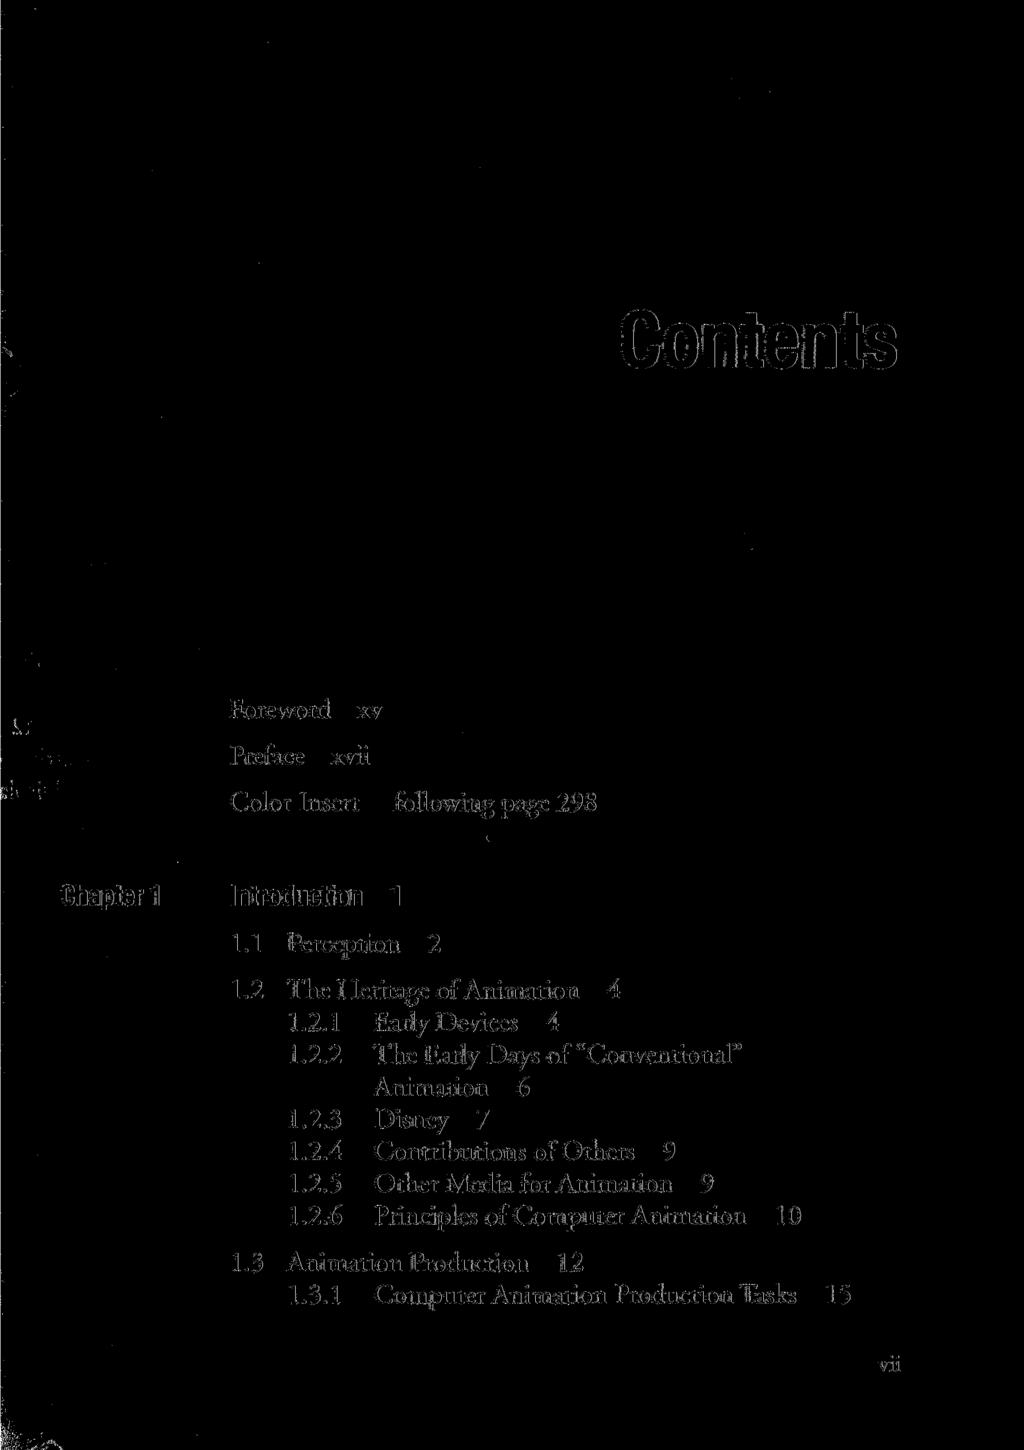 Foreword xv Preface xvii Color Insert following page 298 Chapter 1 Introduction 1 1.1 Perception 2 1.2 The Heri tage of Animation 4 1.2.1 Early Devices 4 1.2.2 The Early Days of "Conventional" Animation 6 1.